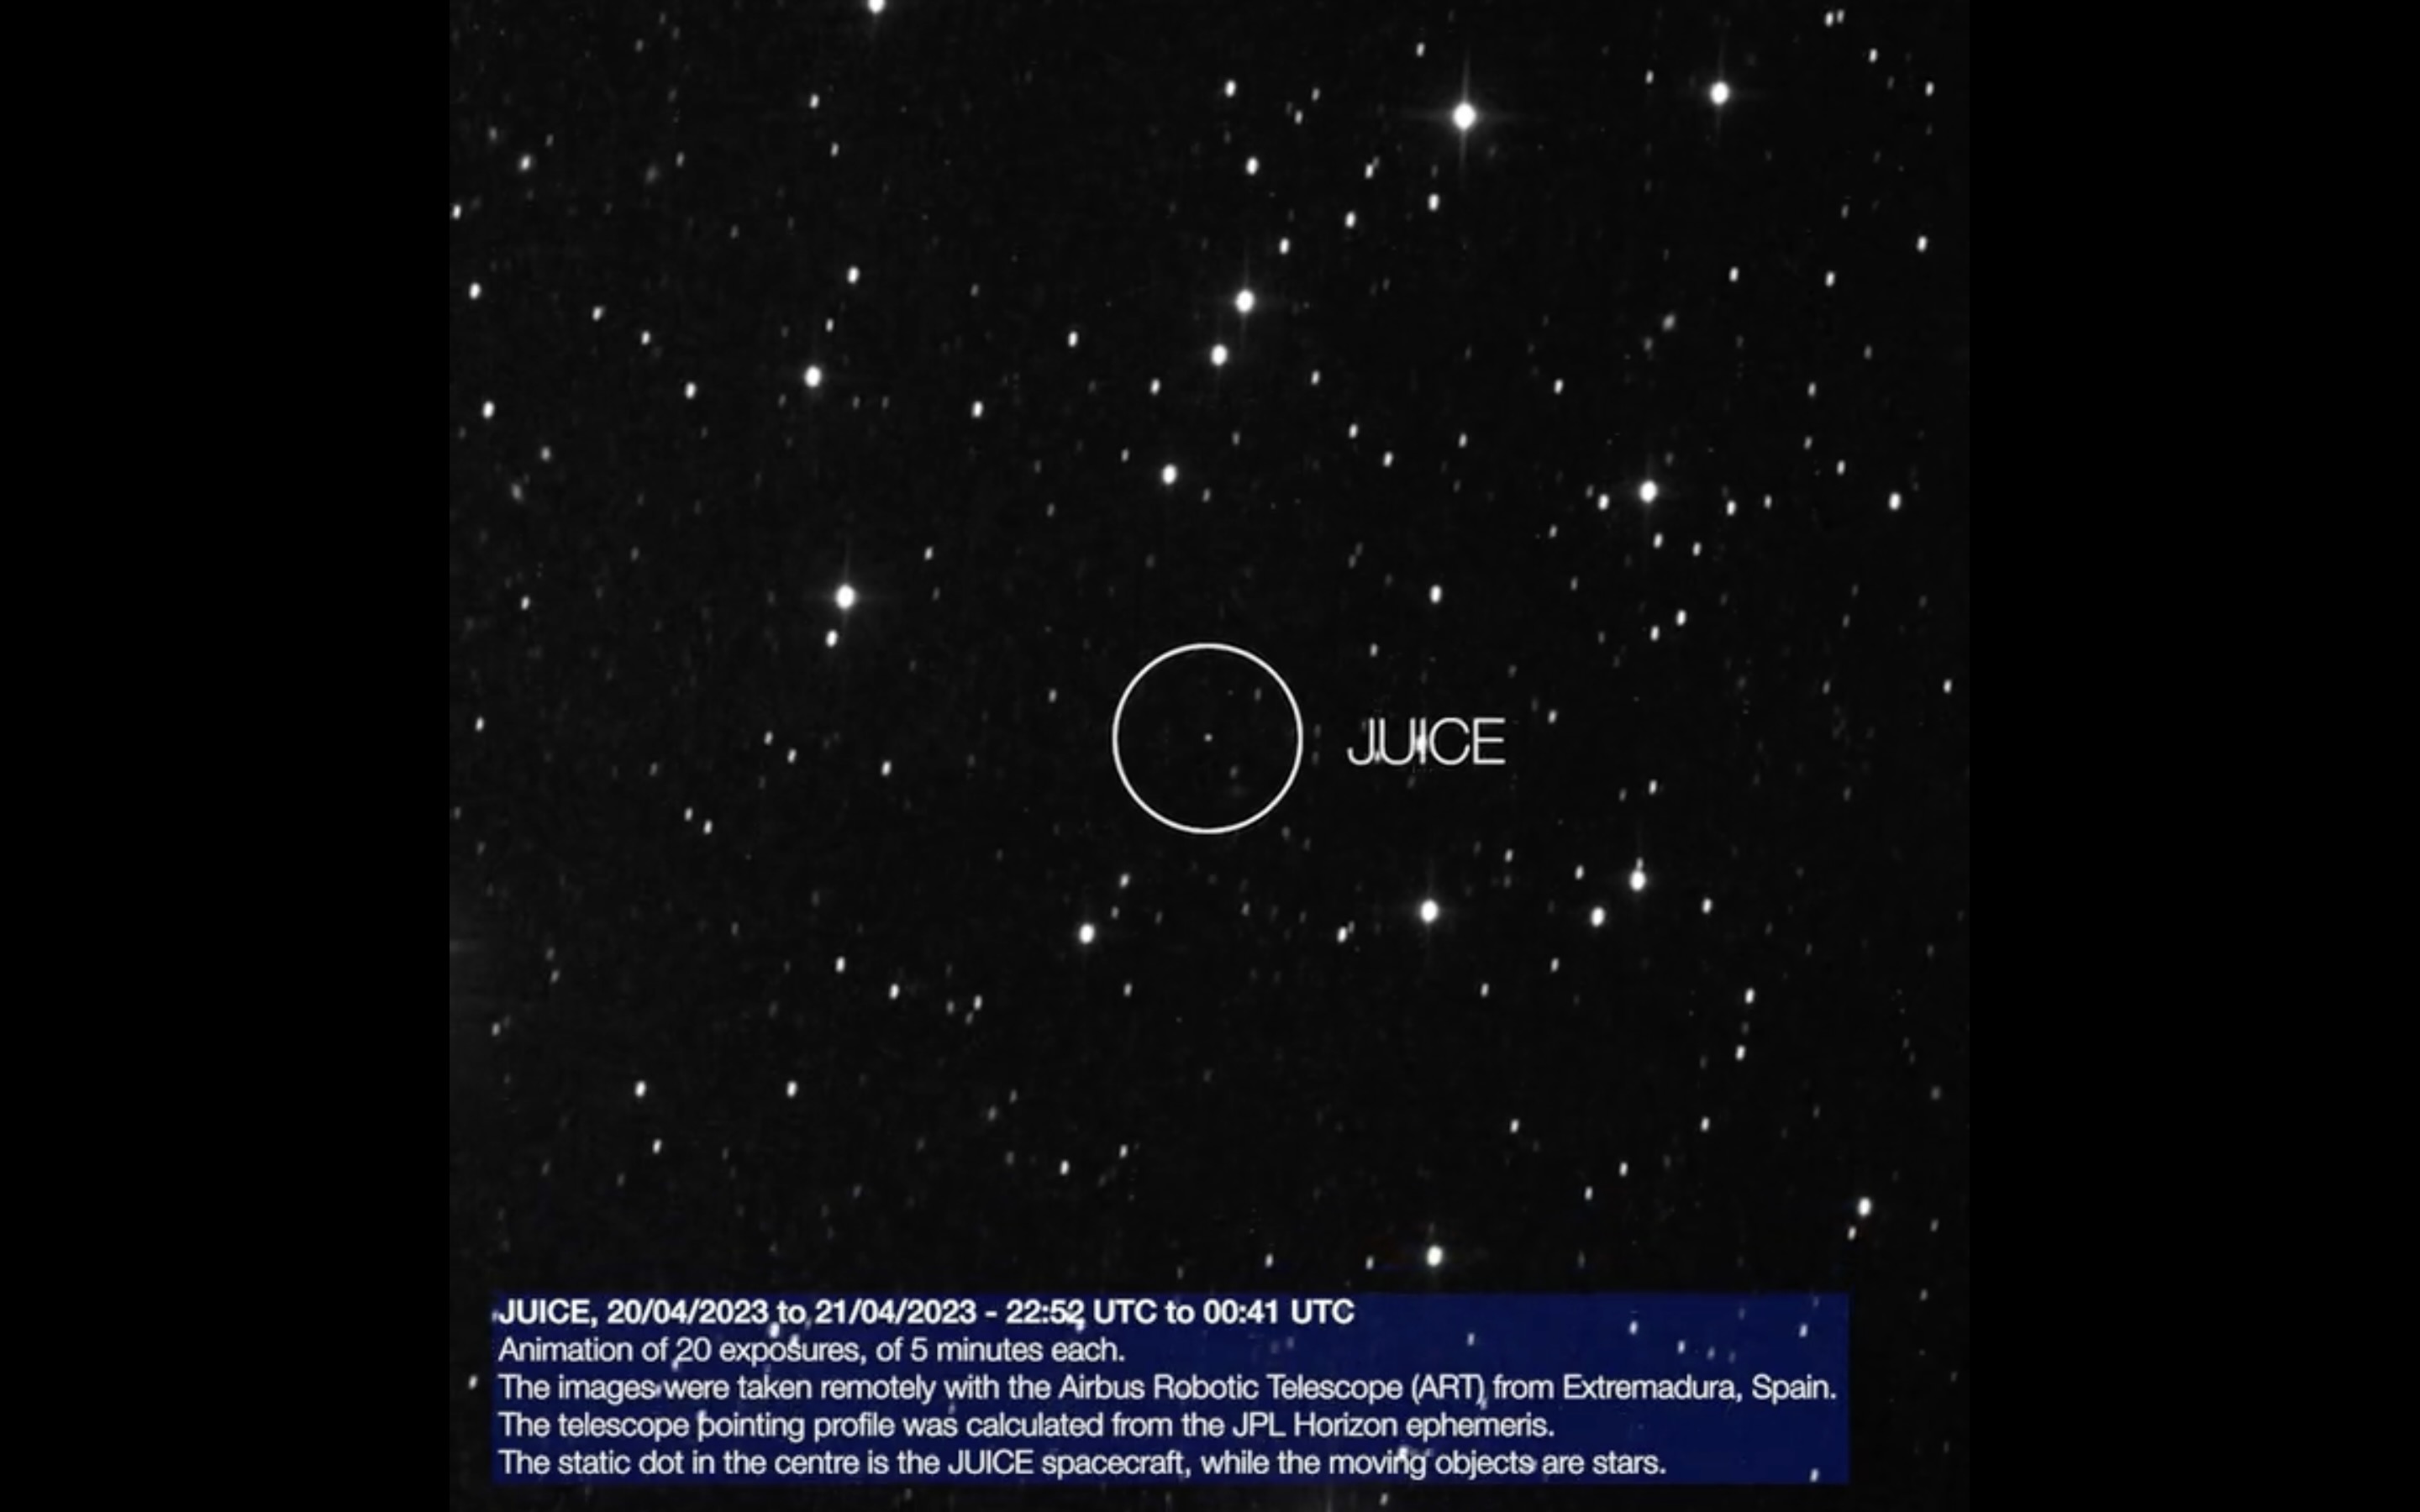 JUICE Jupiter probe spotted 1 million miles from Earth (video, image) thumbnail